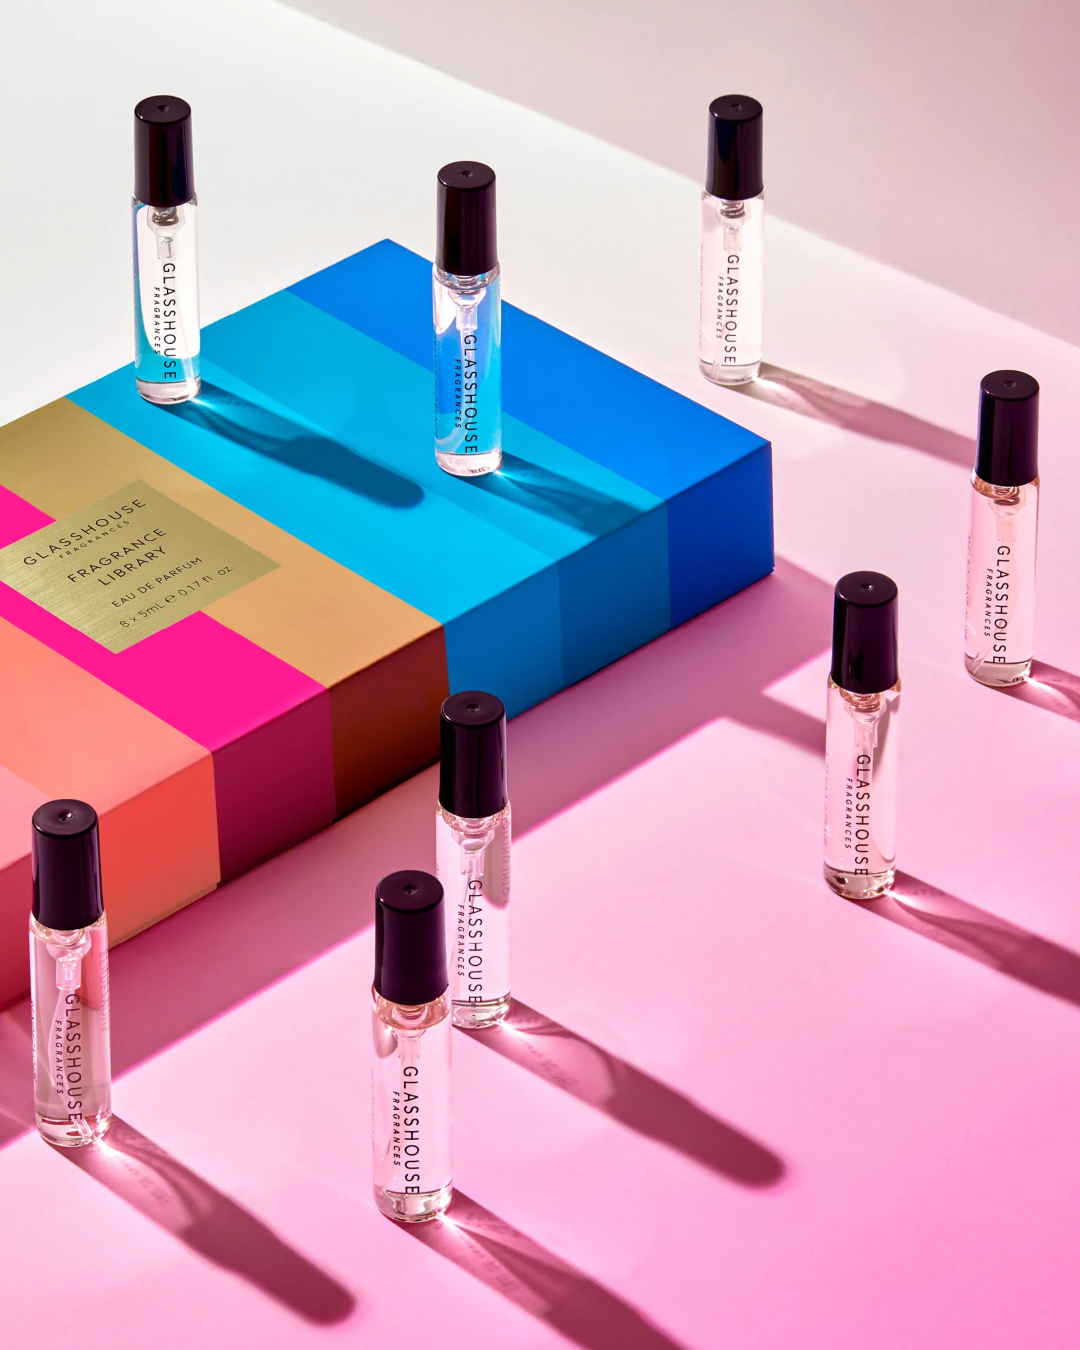 8 small vials of perfume and a colourful striped gift box against a pink backdrop.